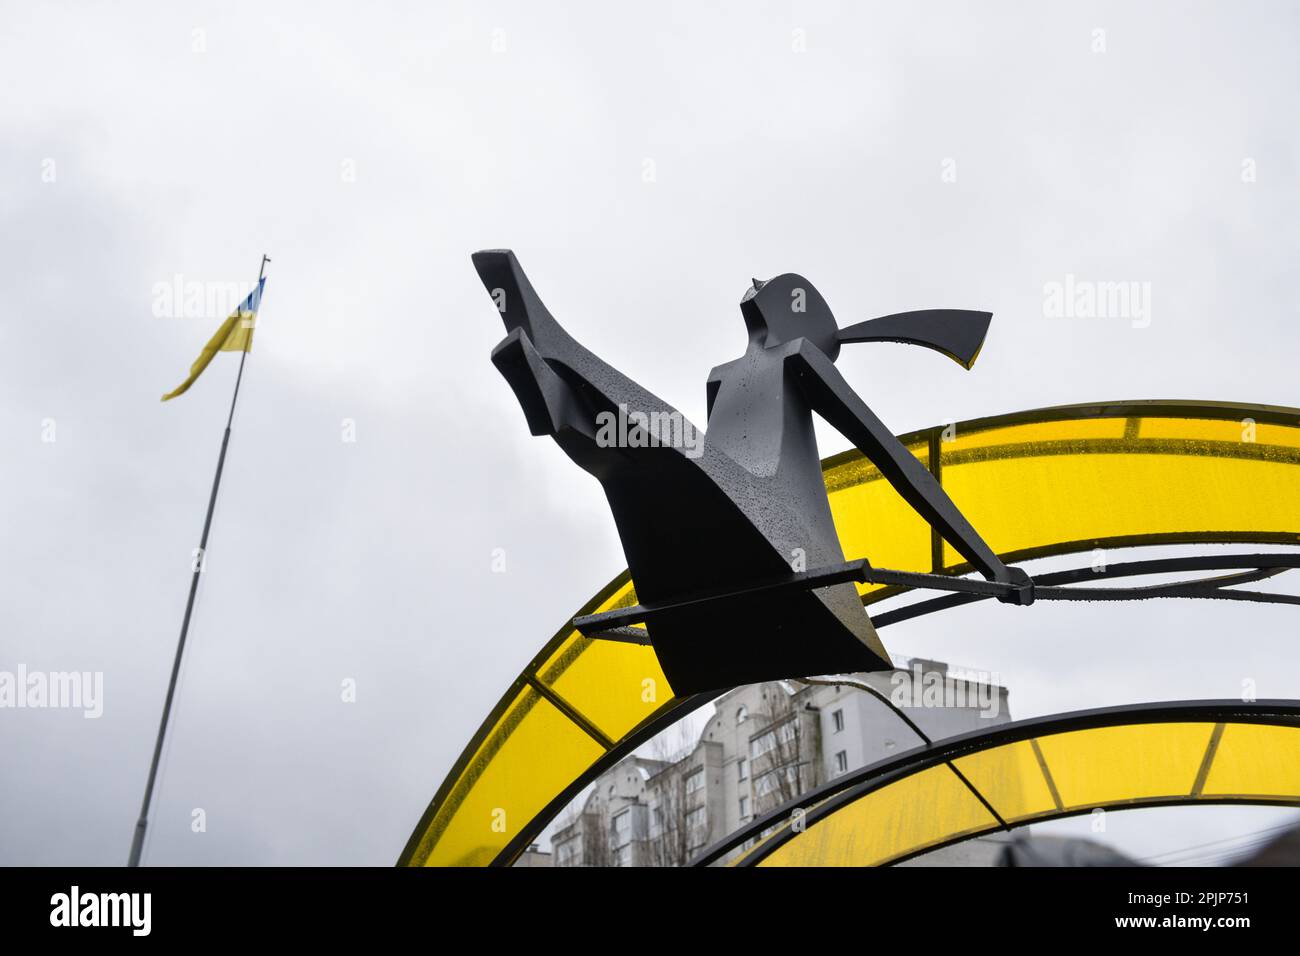 View of the sculpture 'Girl under the sun' in Borodyanka. The sculpture 'Girl under the sun' was opened in Borordyanka in honor of the anniversary of the de-occupation of Kyiv region. The four-meter sculpture represents the victory of life over destruction, and its arches will symbolize the resistance of seven districts of Kyiv region and the capital. This is how the symbolic date was celebrated - a year ago, the Armed Forces of Ukraine completely liberated the Kyiv region from the Russian invaders. 'The sculpture reflects the powerful contrast of life and destruction that accompanied Ukrainia Stock Photo